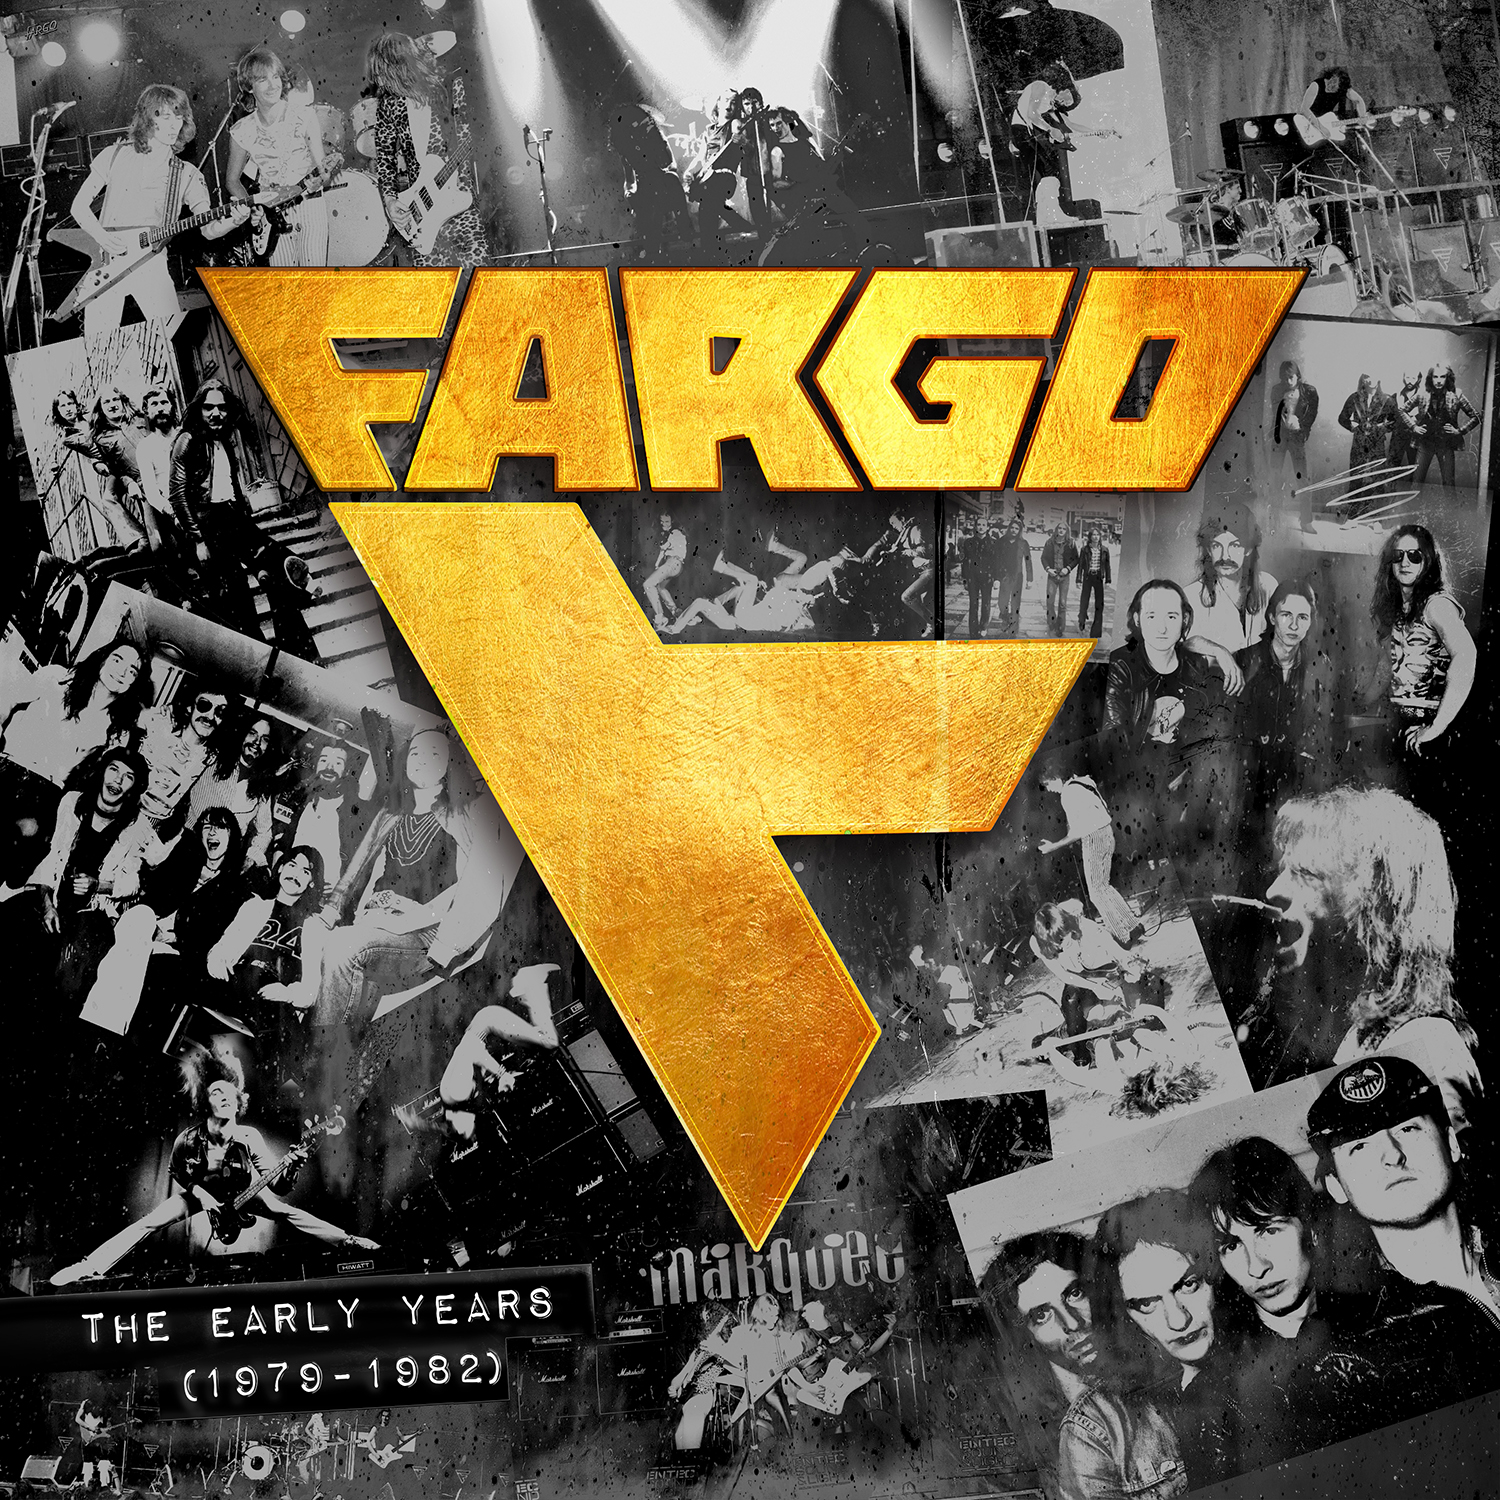 Fargo (D) – The Early Years